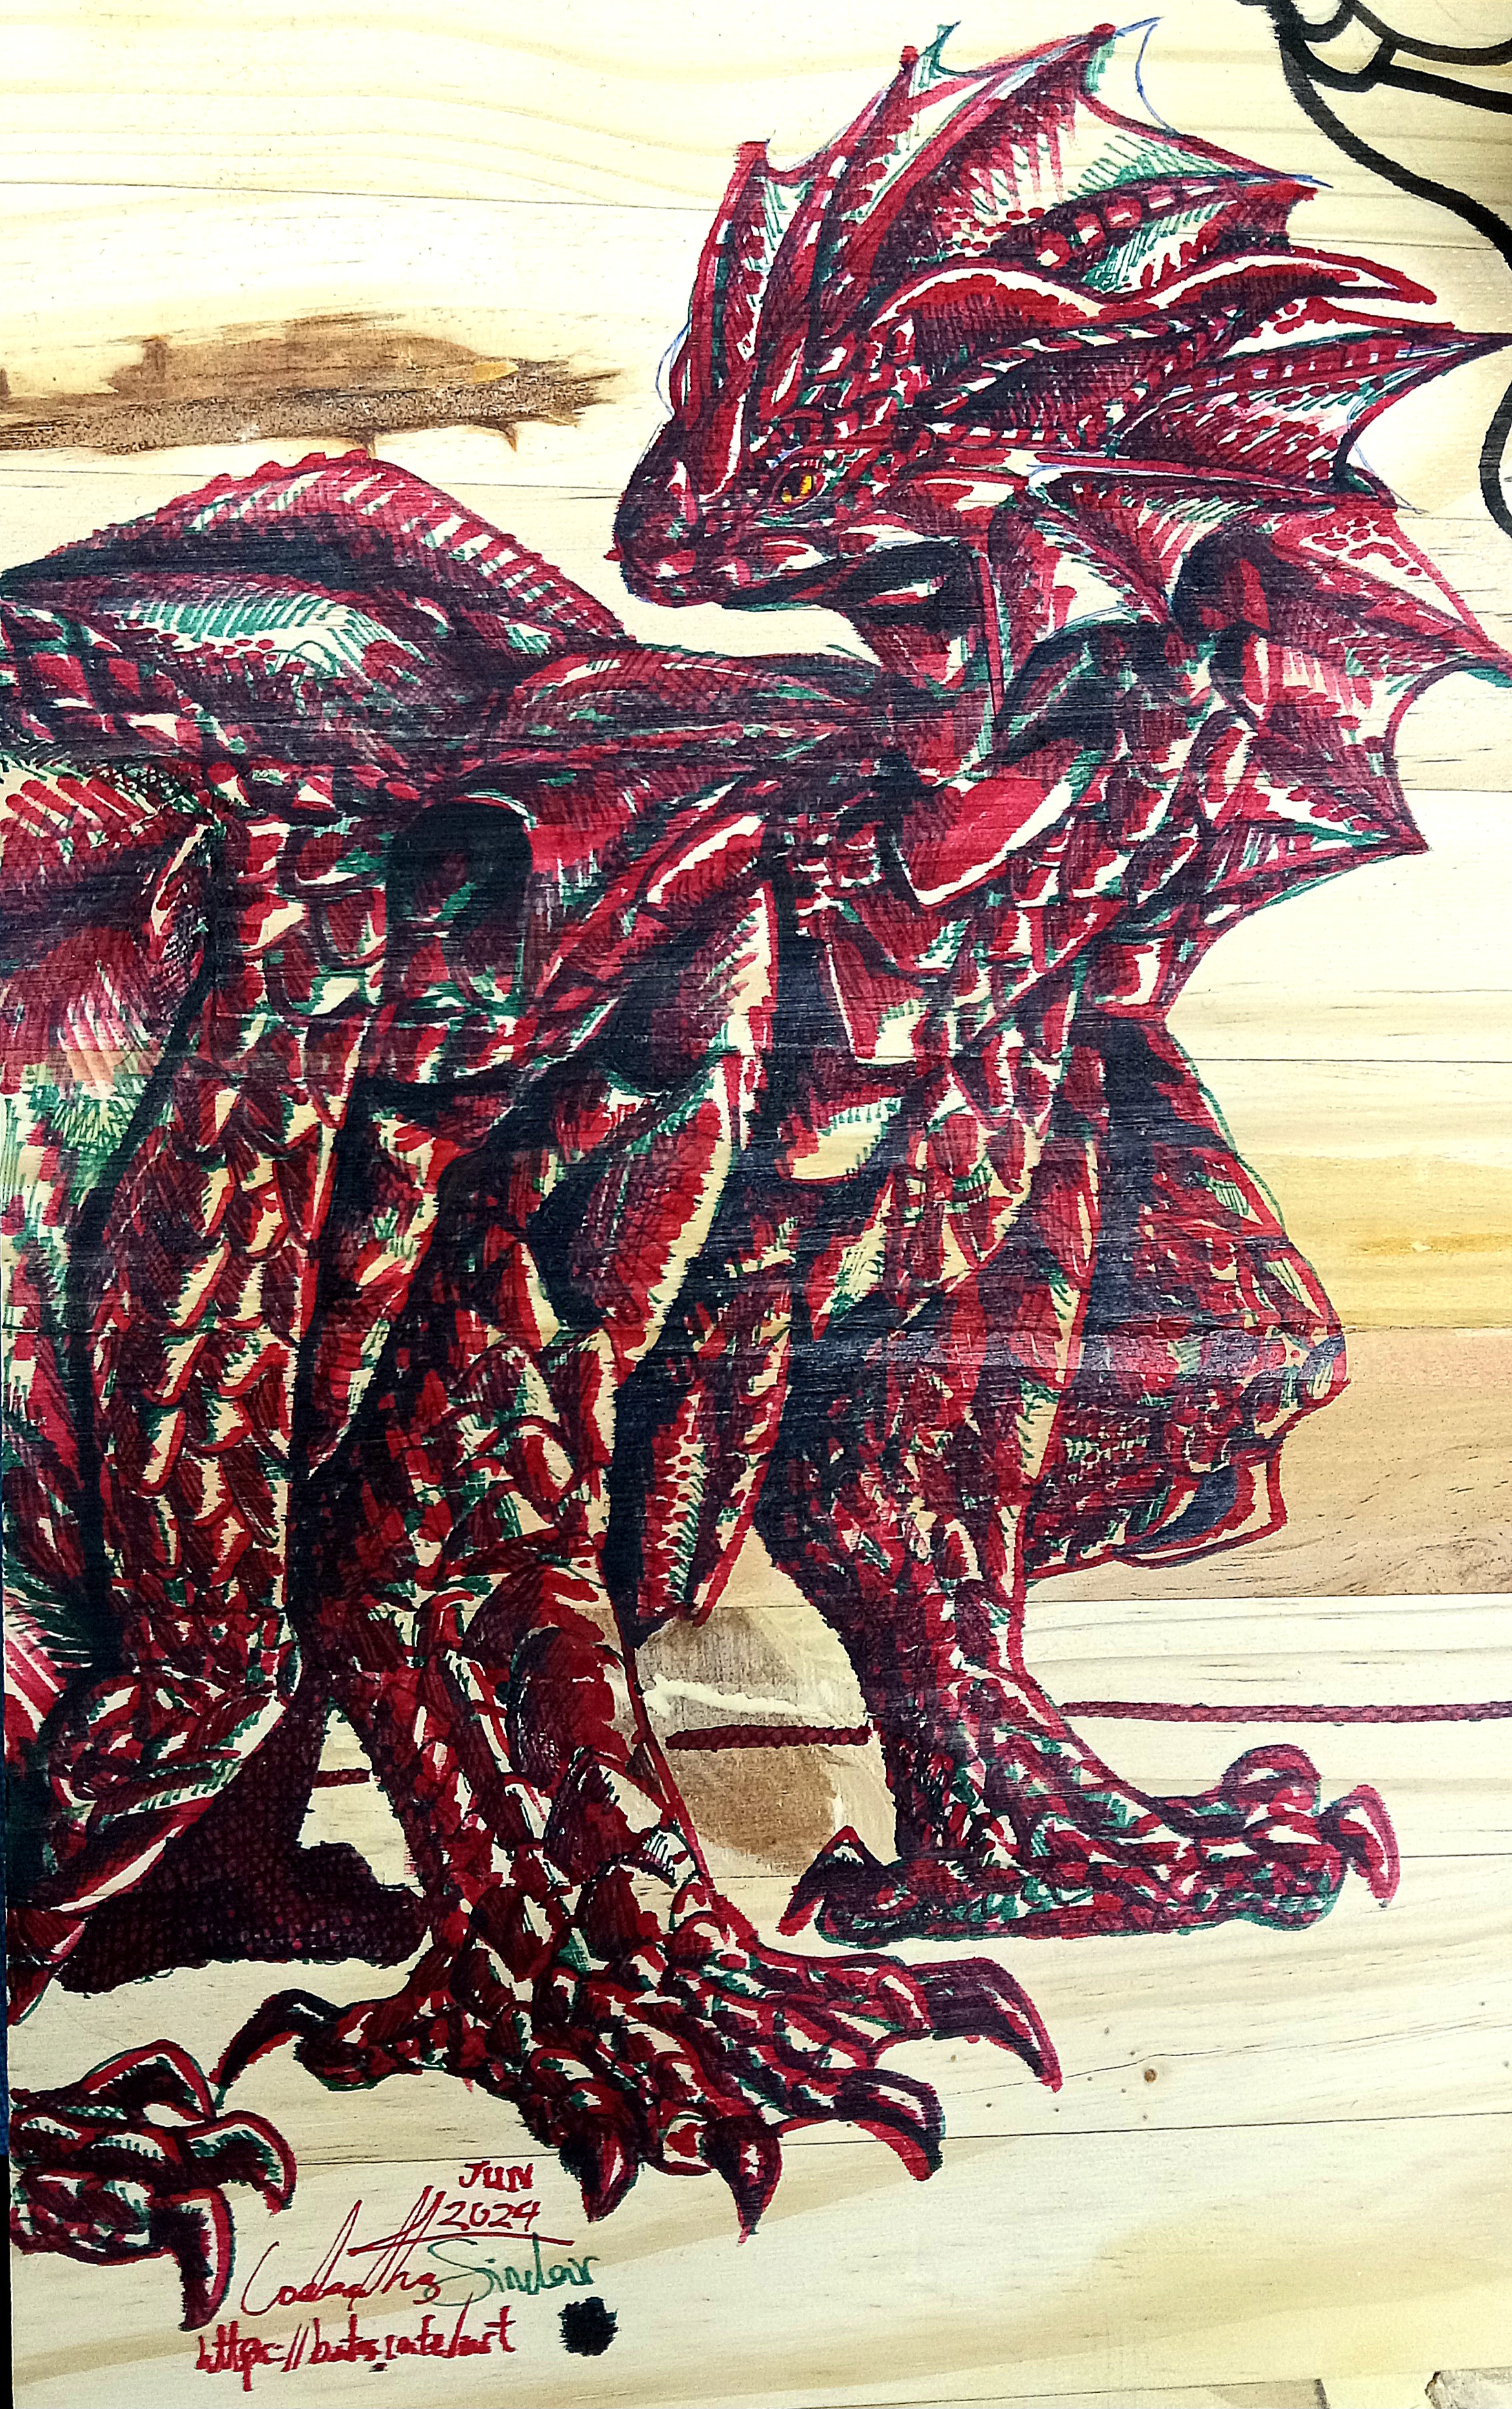 A portrait of a dragon on some wood. Made with red and green markers